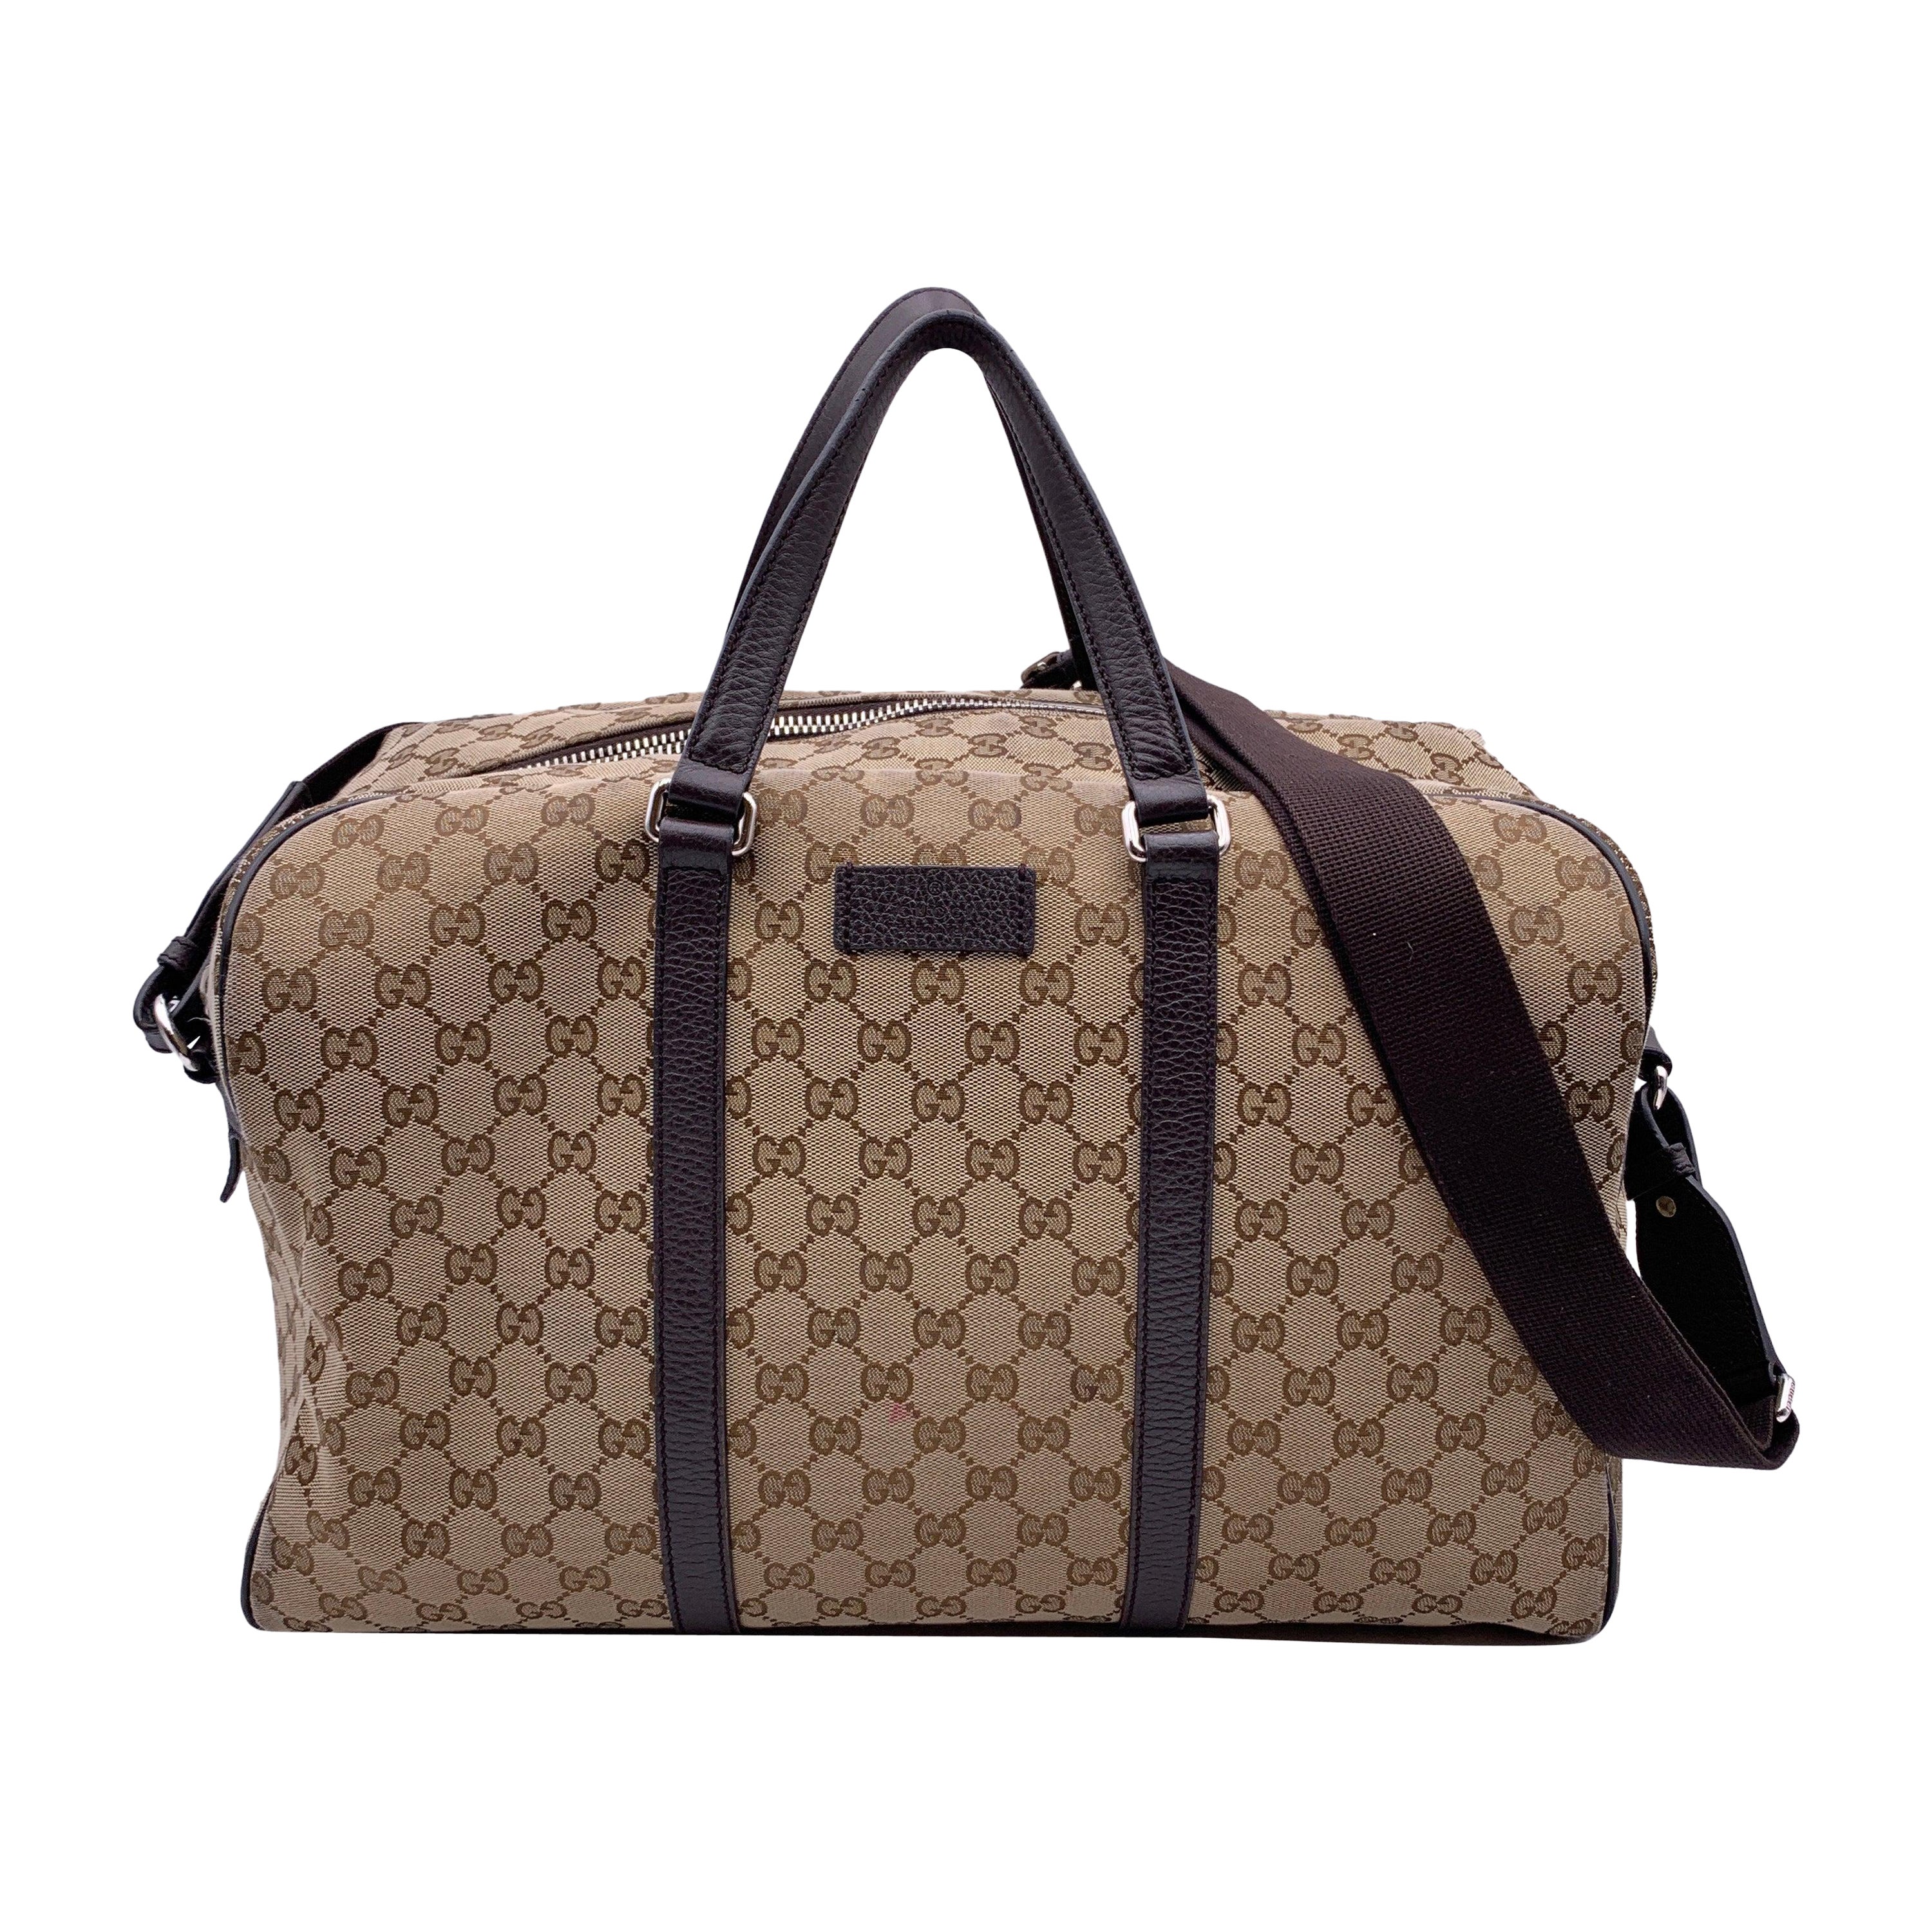 Gucci Beige Monogram Canvas Duffle Weekender Travel Bag with Strap For Sale